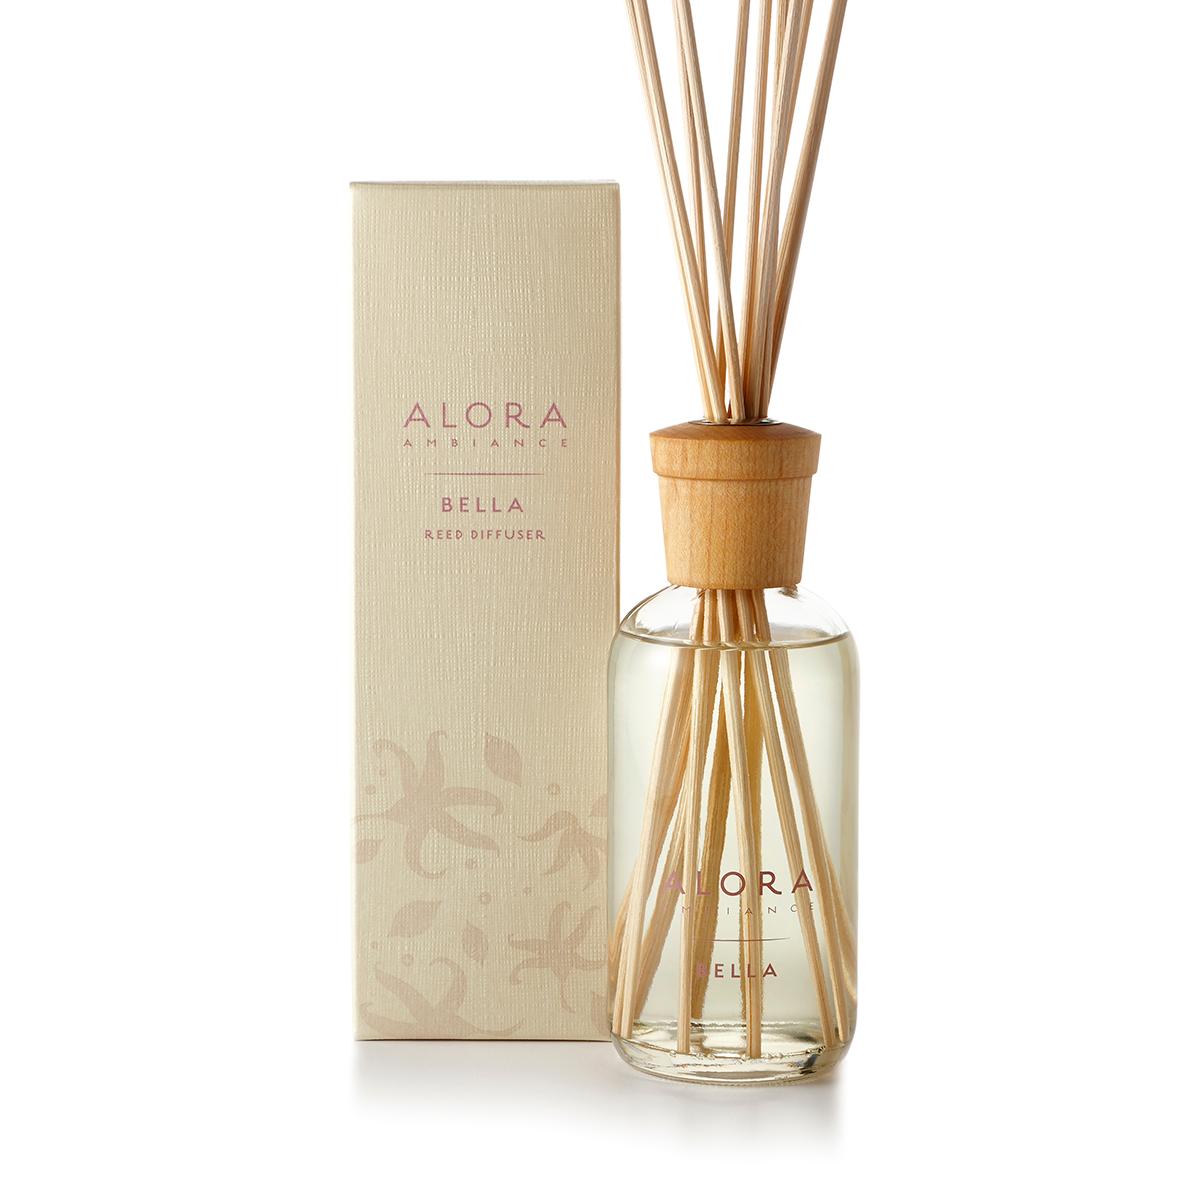 Primary image of Bella Reed Diffuser